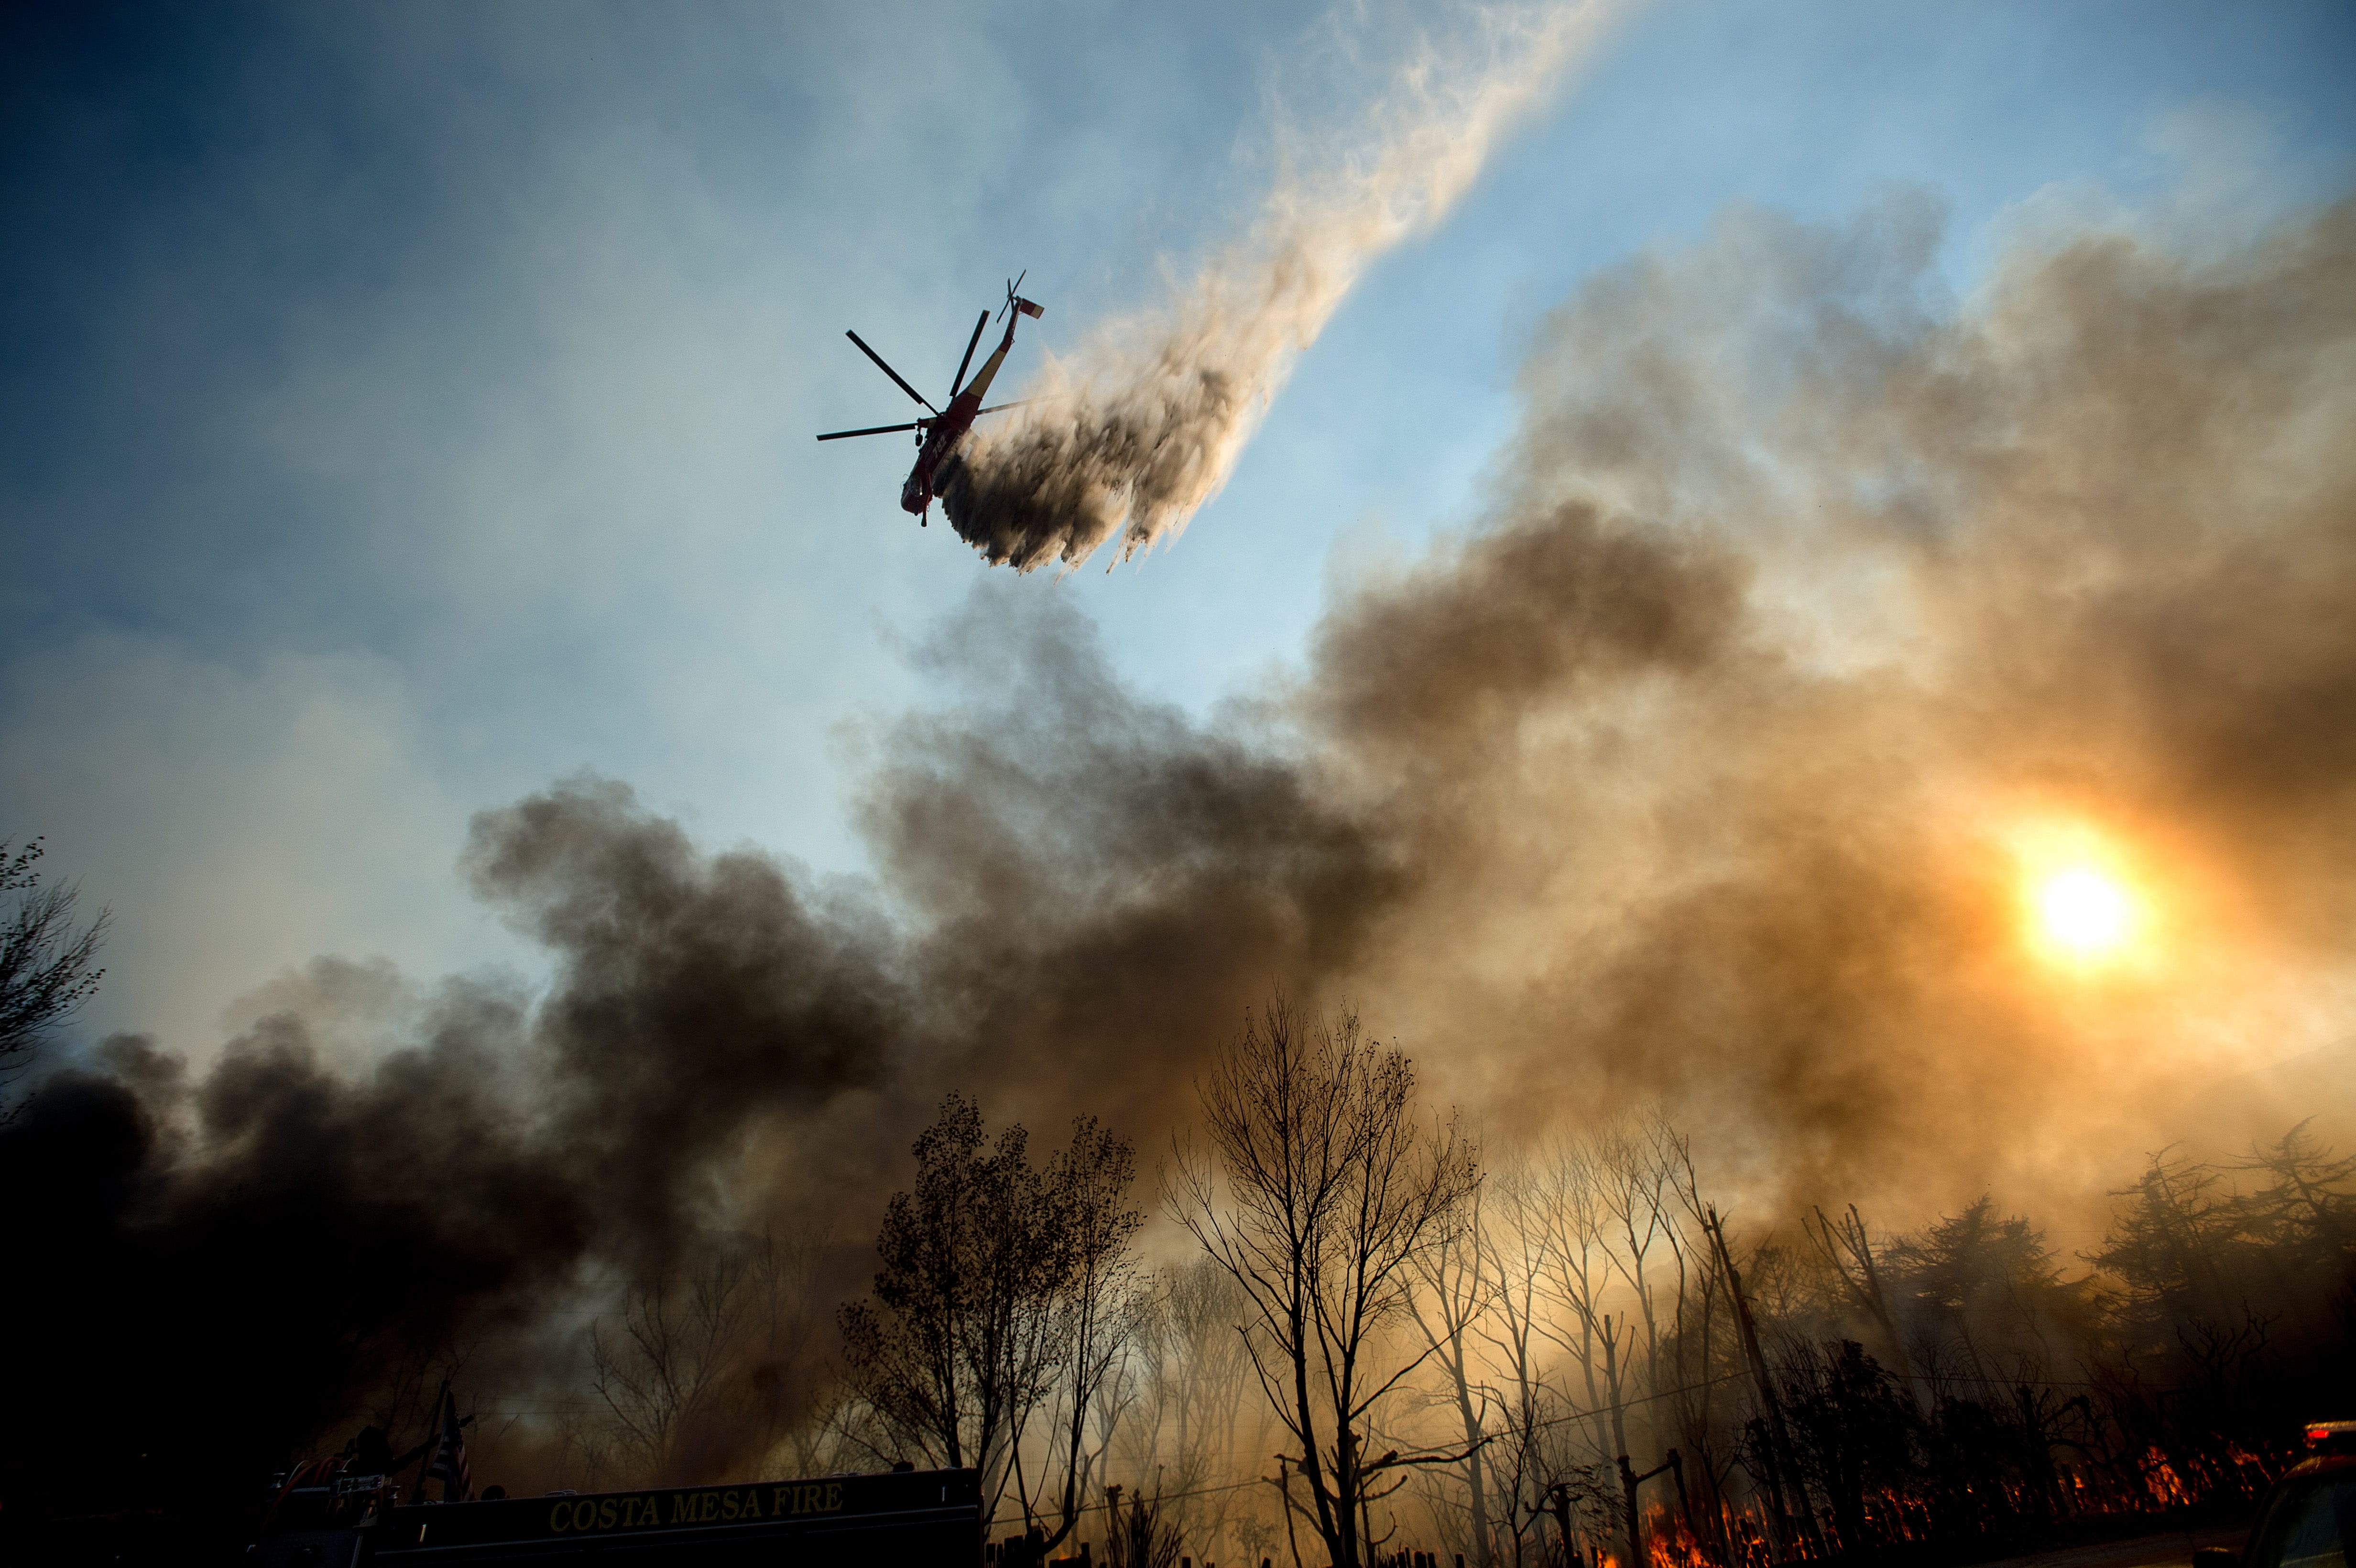 A helicopter drops water on a wildfire as it burns through Keenbrook, Calif., on Wednesday, Aug. 17, 2016. Firefighters had at least established a foothold of control of the blaze the day after it broke out for unknown reasons in the Cajon Pass near Interstate 15, the vital artery between Los Angeles and Las Vegas. Five years of drought have turned the state's wildlands into a tinder box, with eight fires currently burning from Shasta County in the far north to Camp Pendleton just north of San Diego.